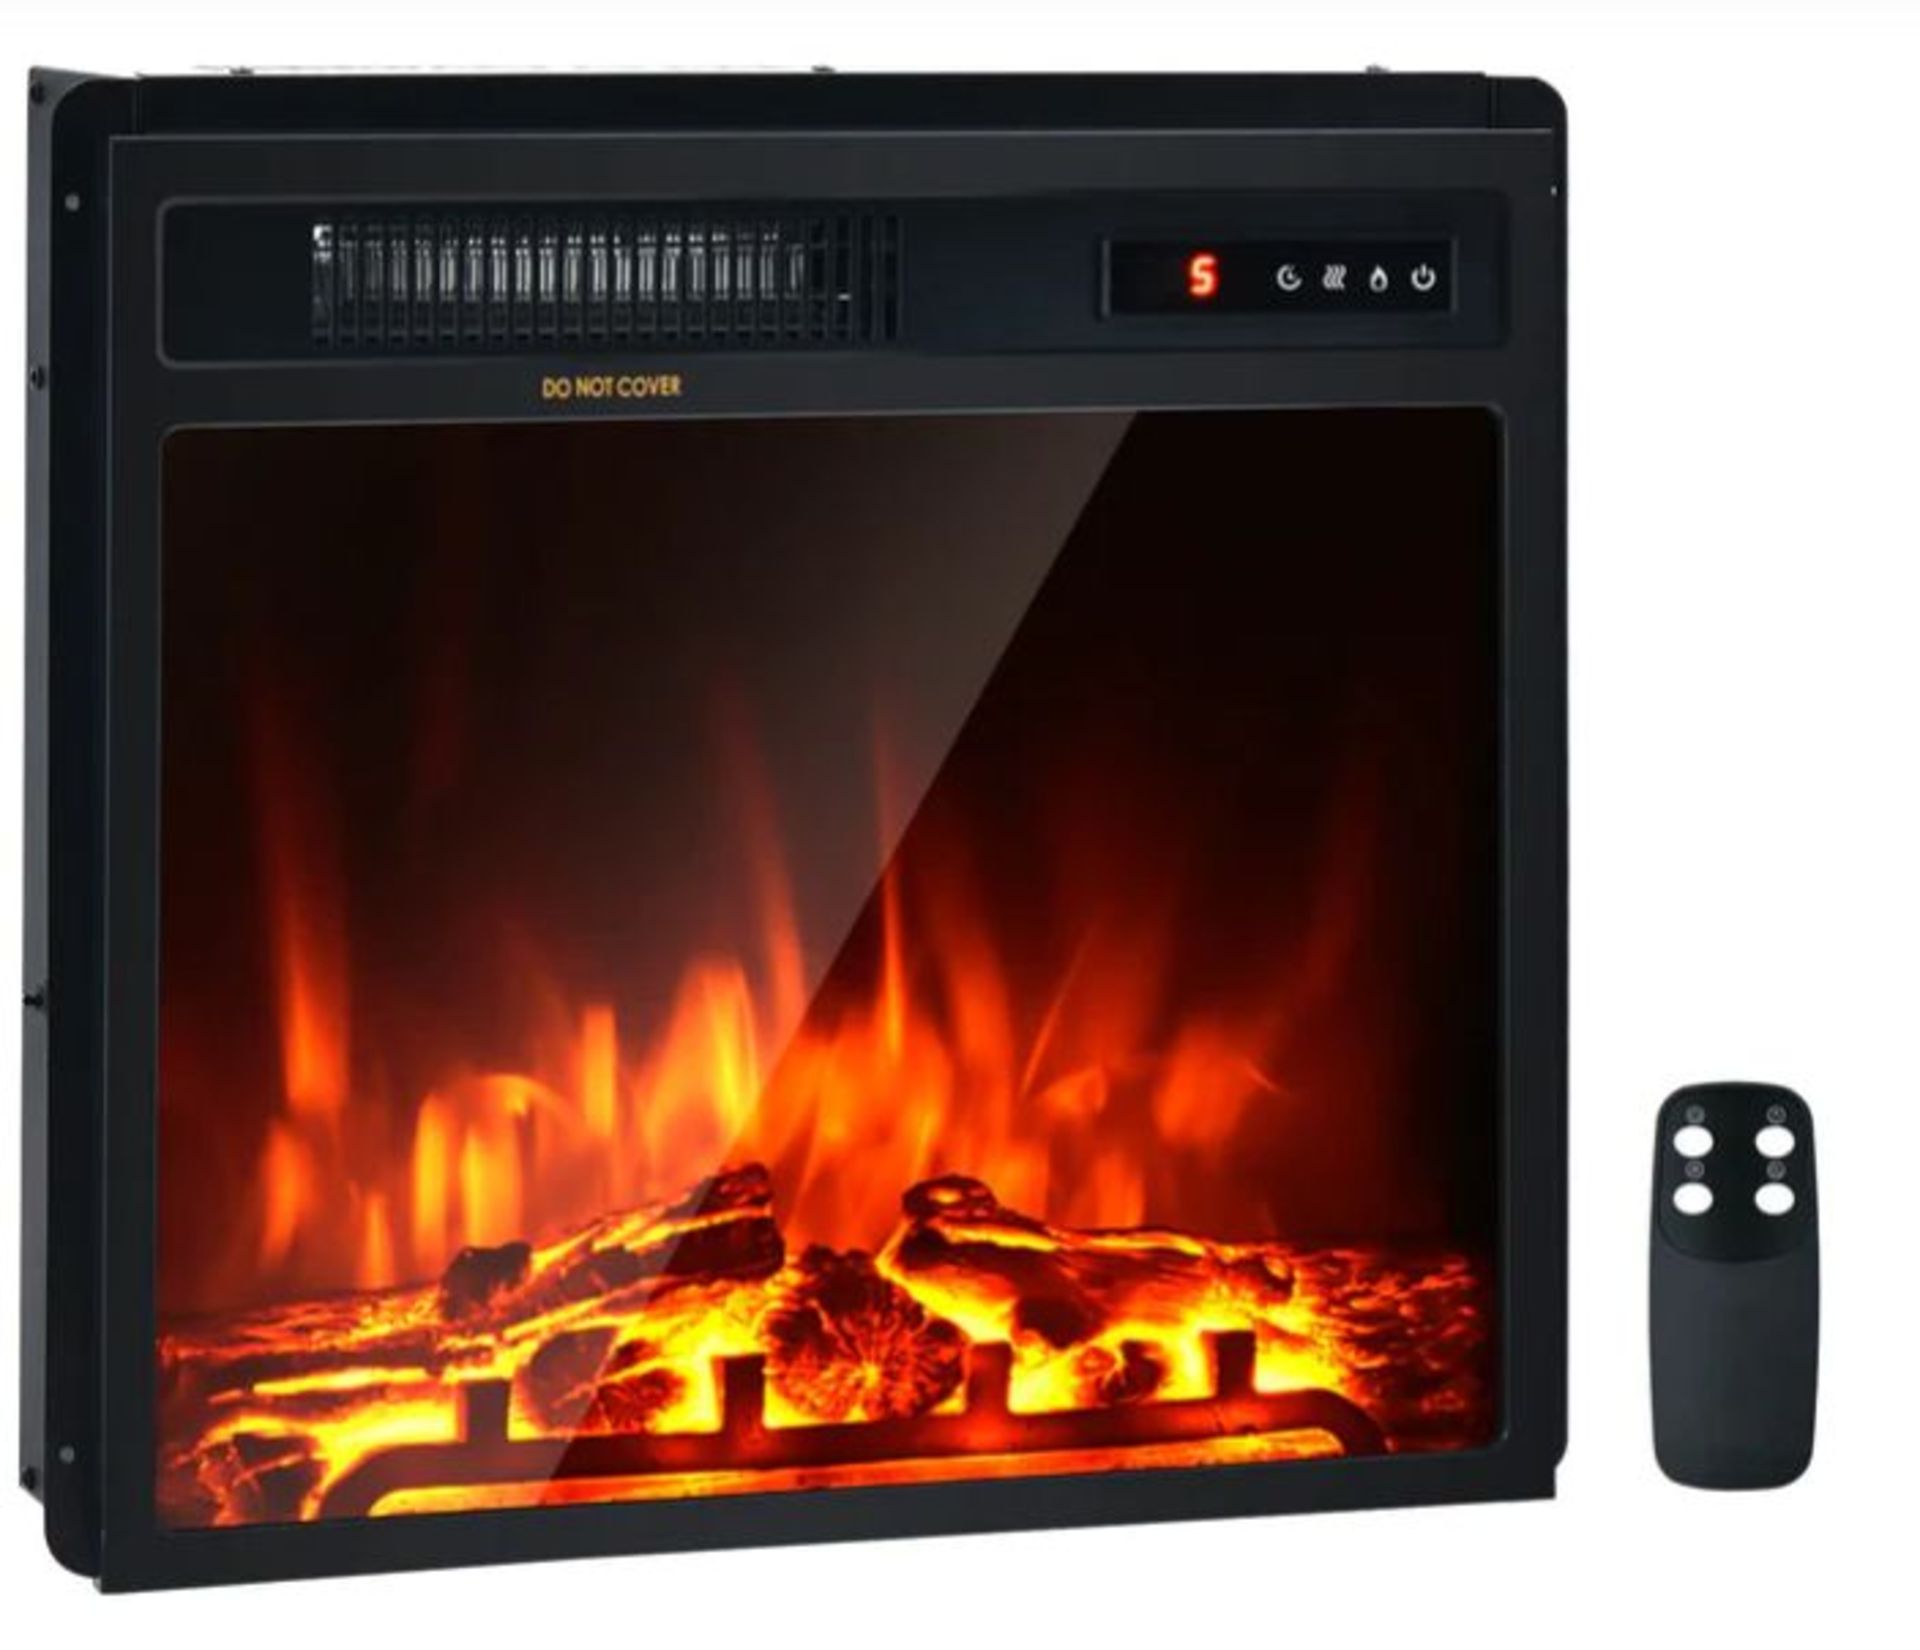 18"/45CM ELECTRIC FIREPLACE 1500W WITH REMOTE CONTROL AND ADJUSTABLE FLAME. - R14.4. This electric